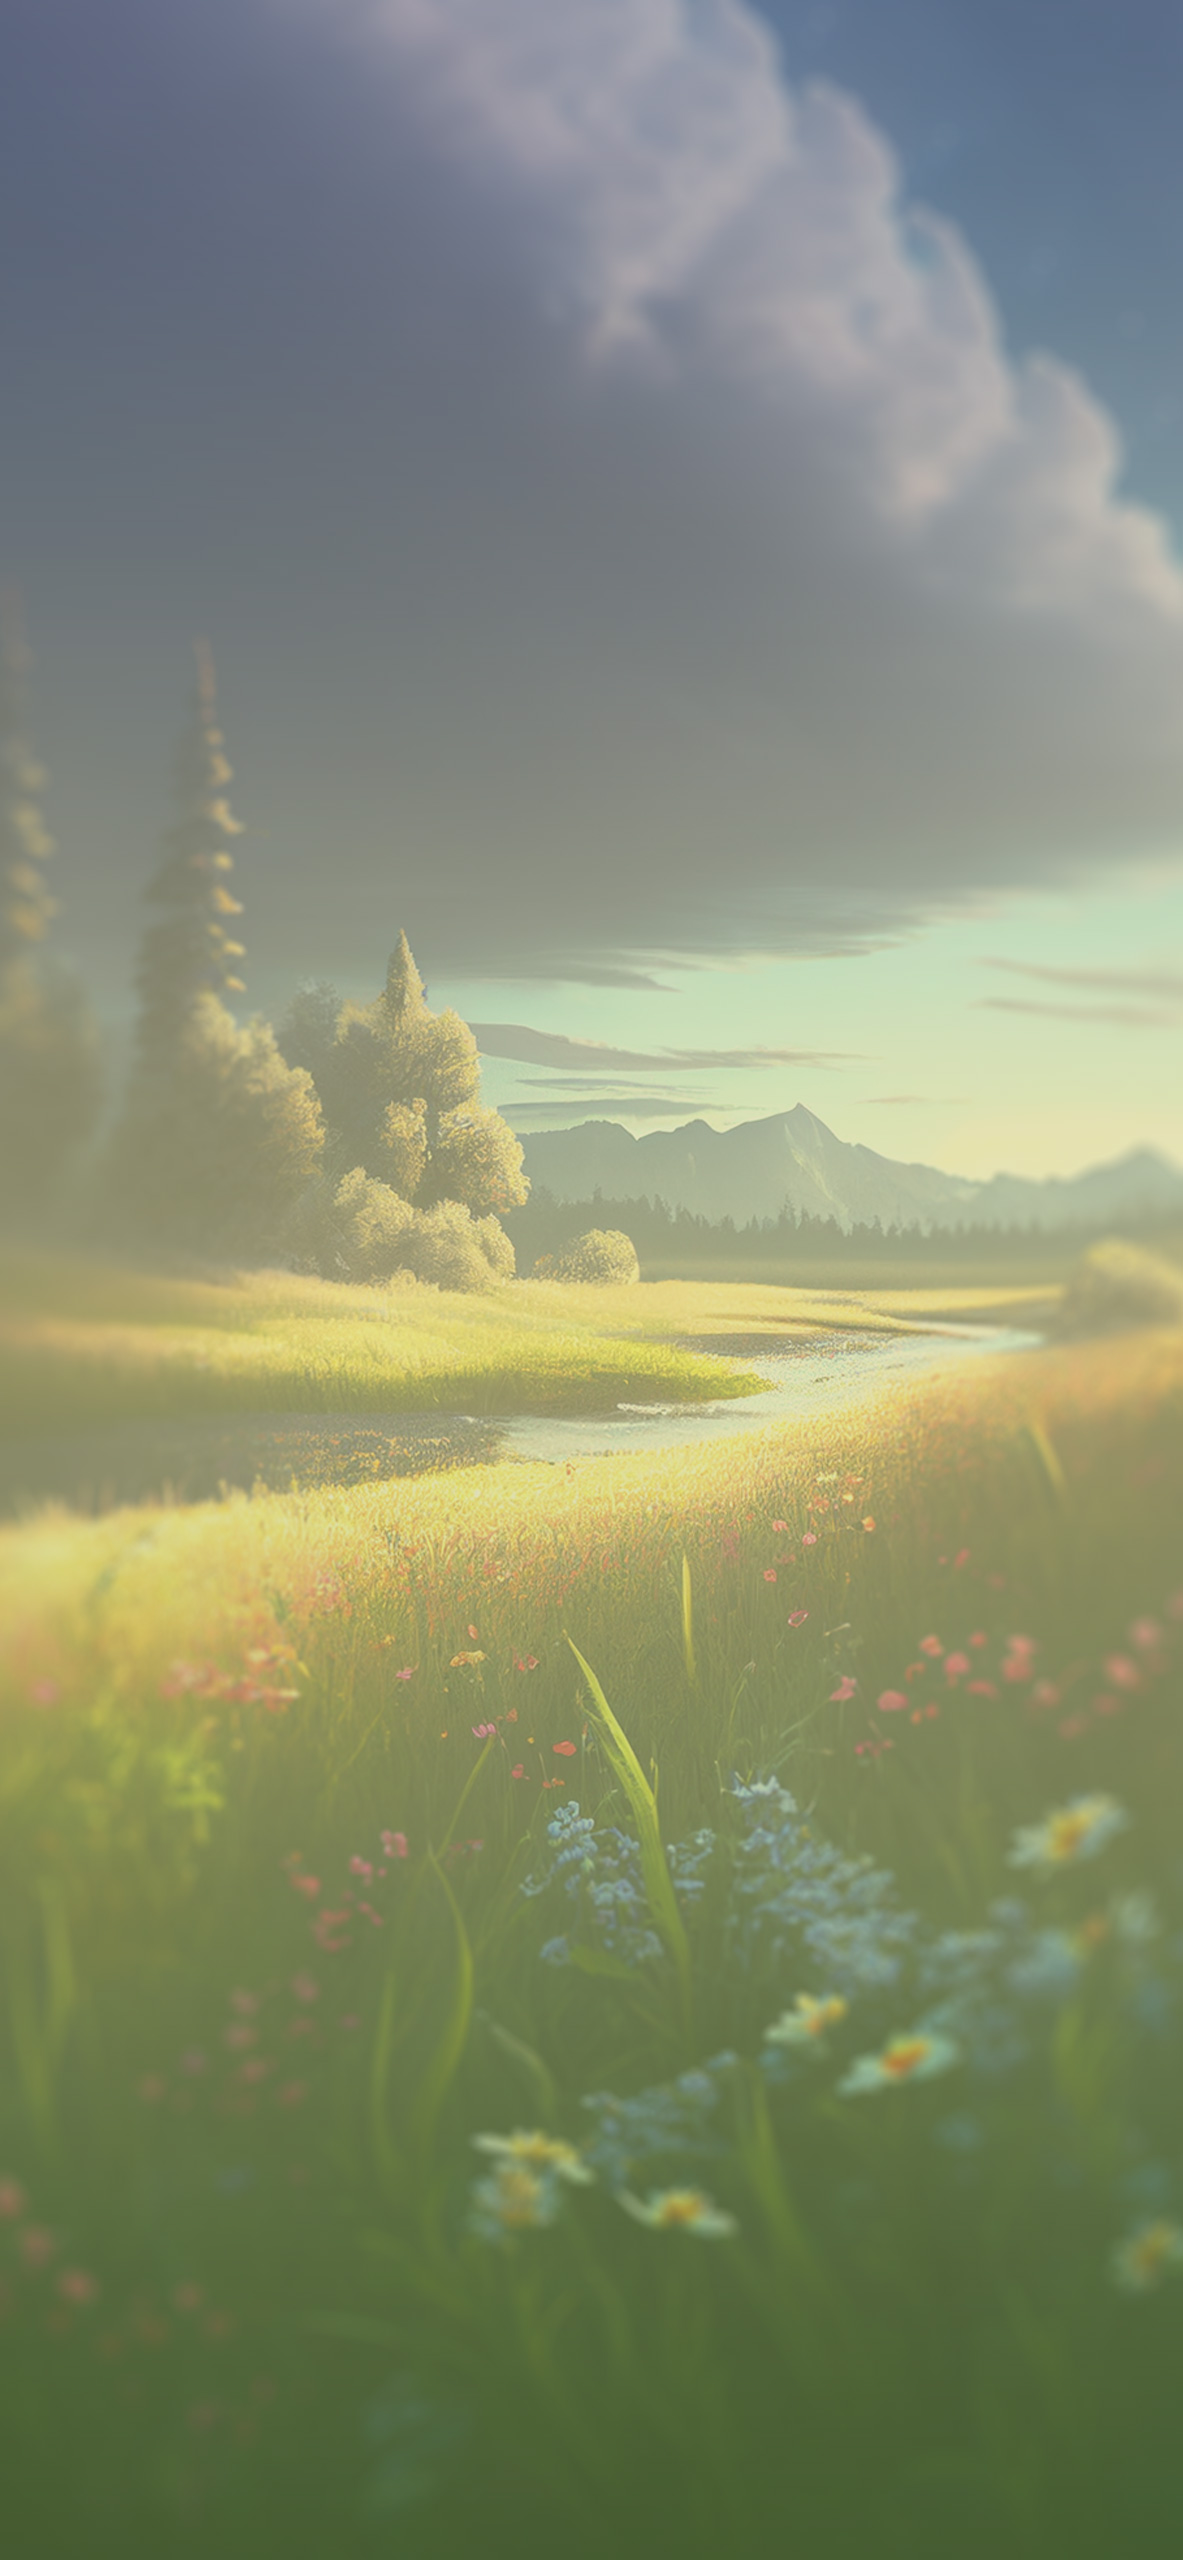 meadow river aesthetic background